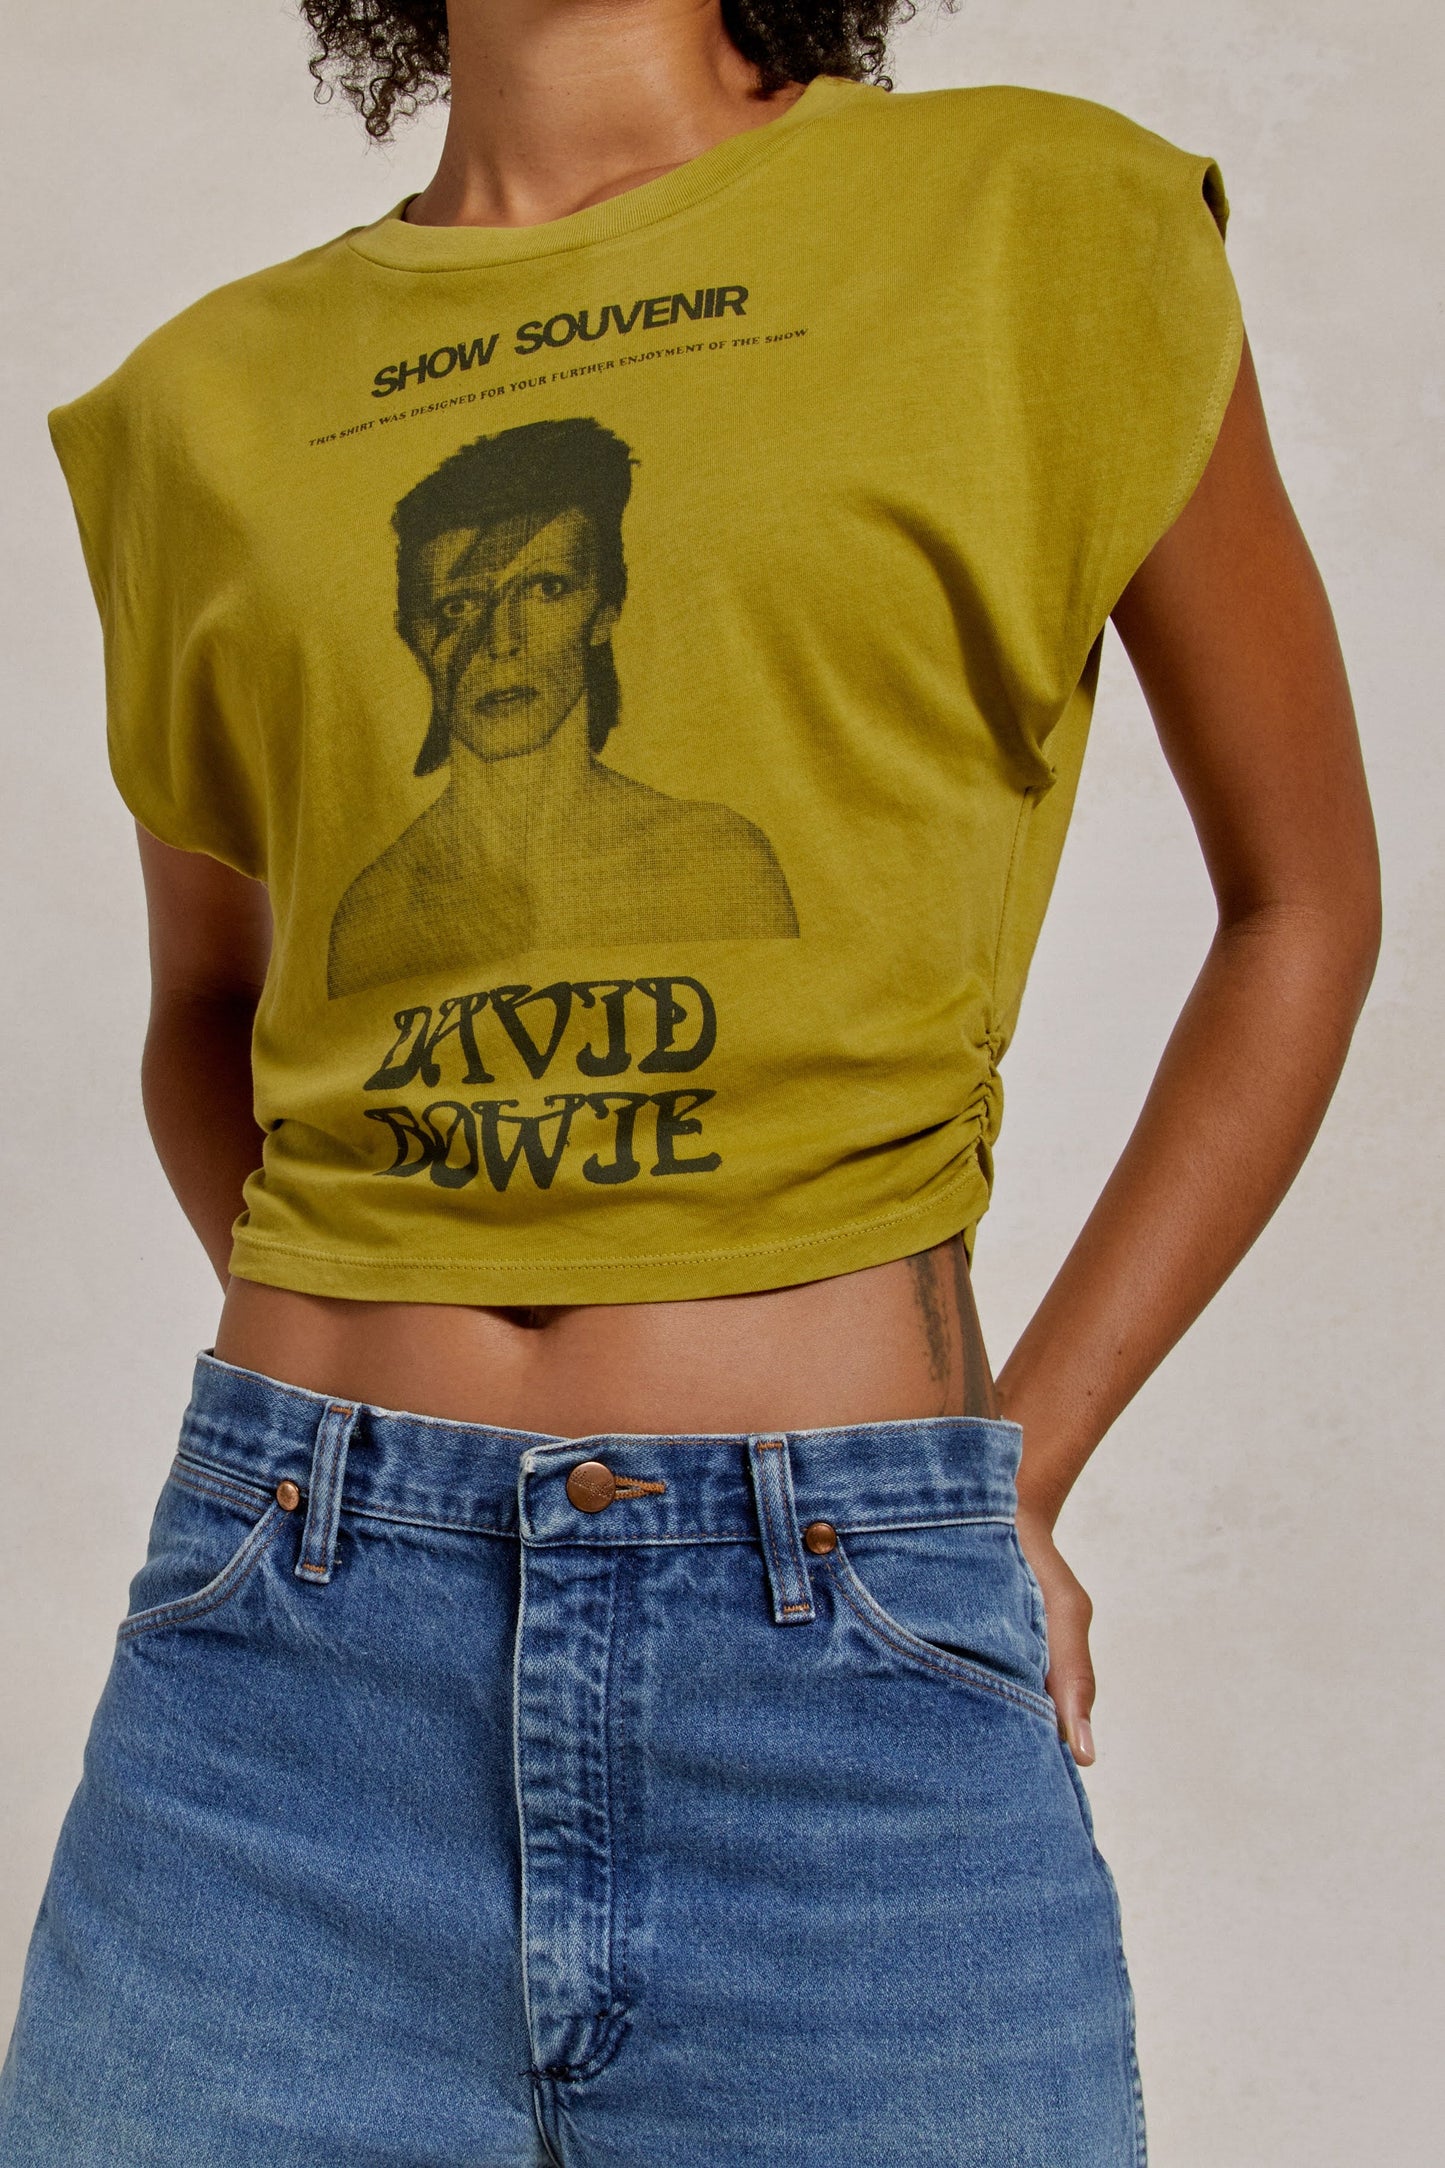 Daydreamer David Bowie Show Flyer Banded Tee